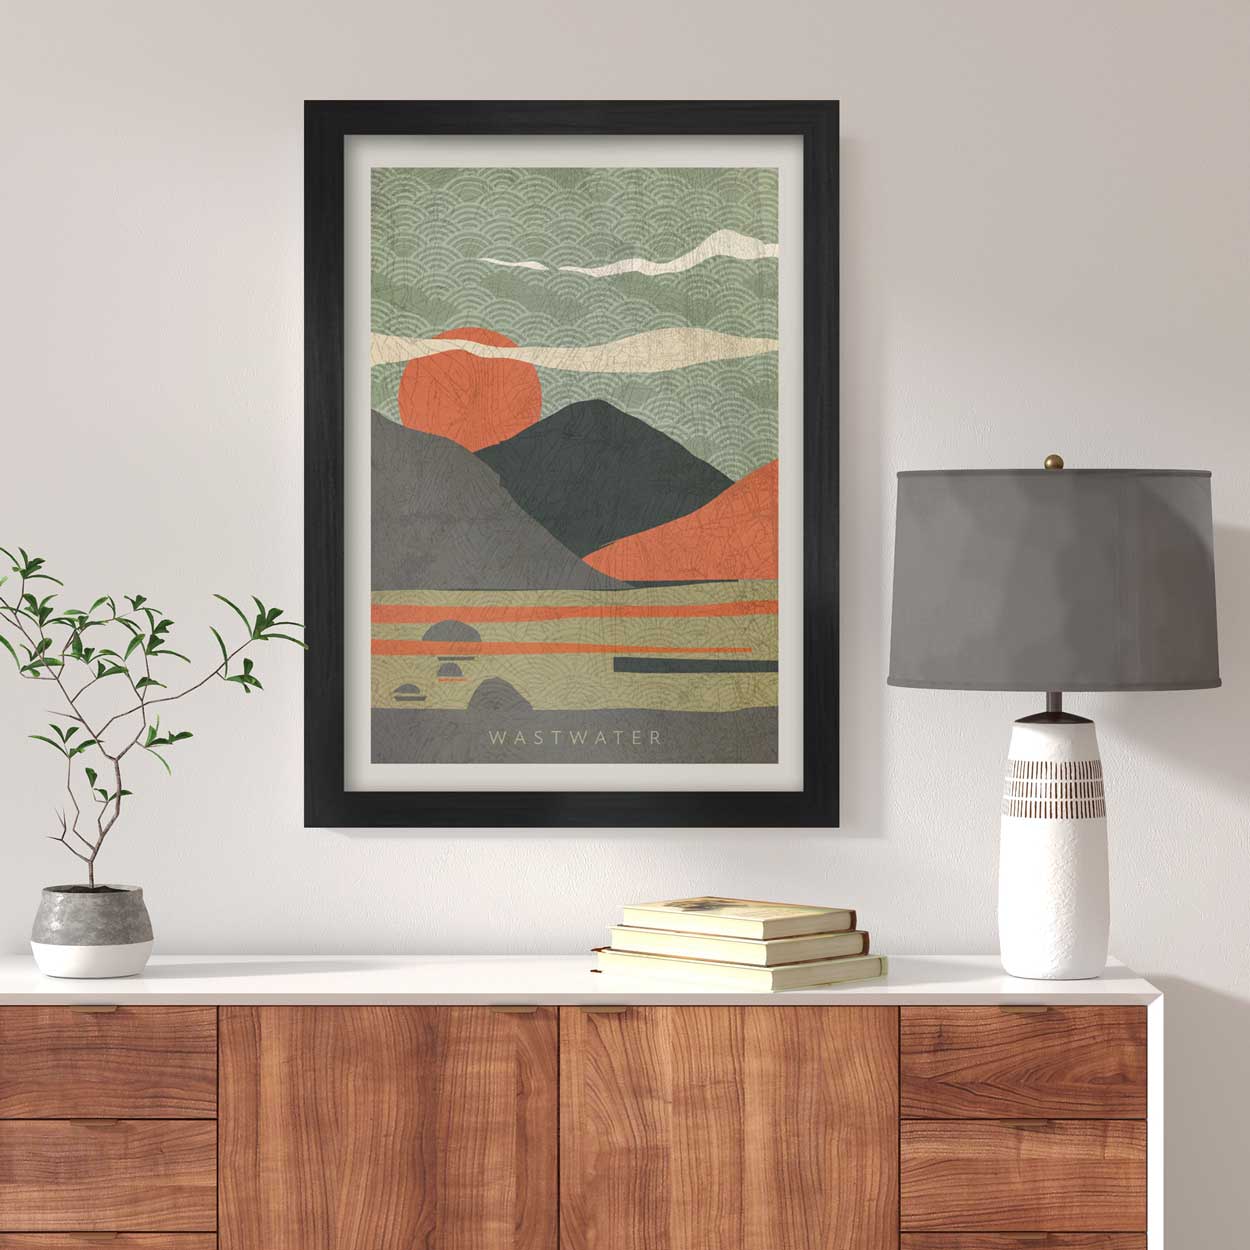 wast water lake district poster